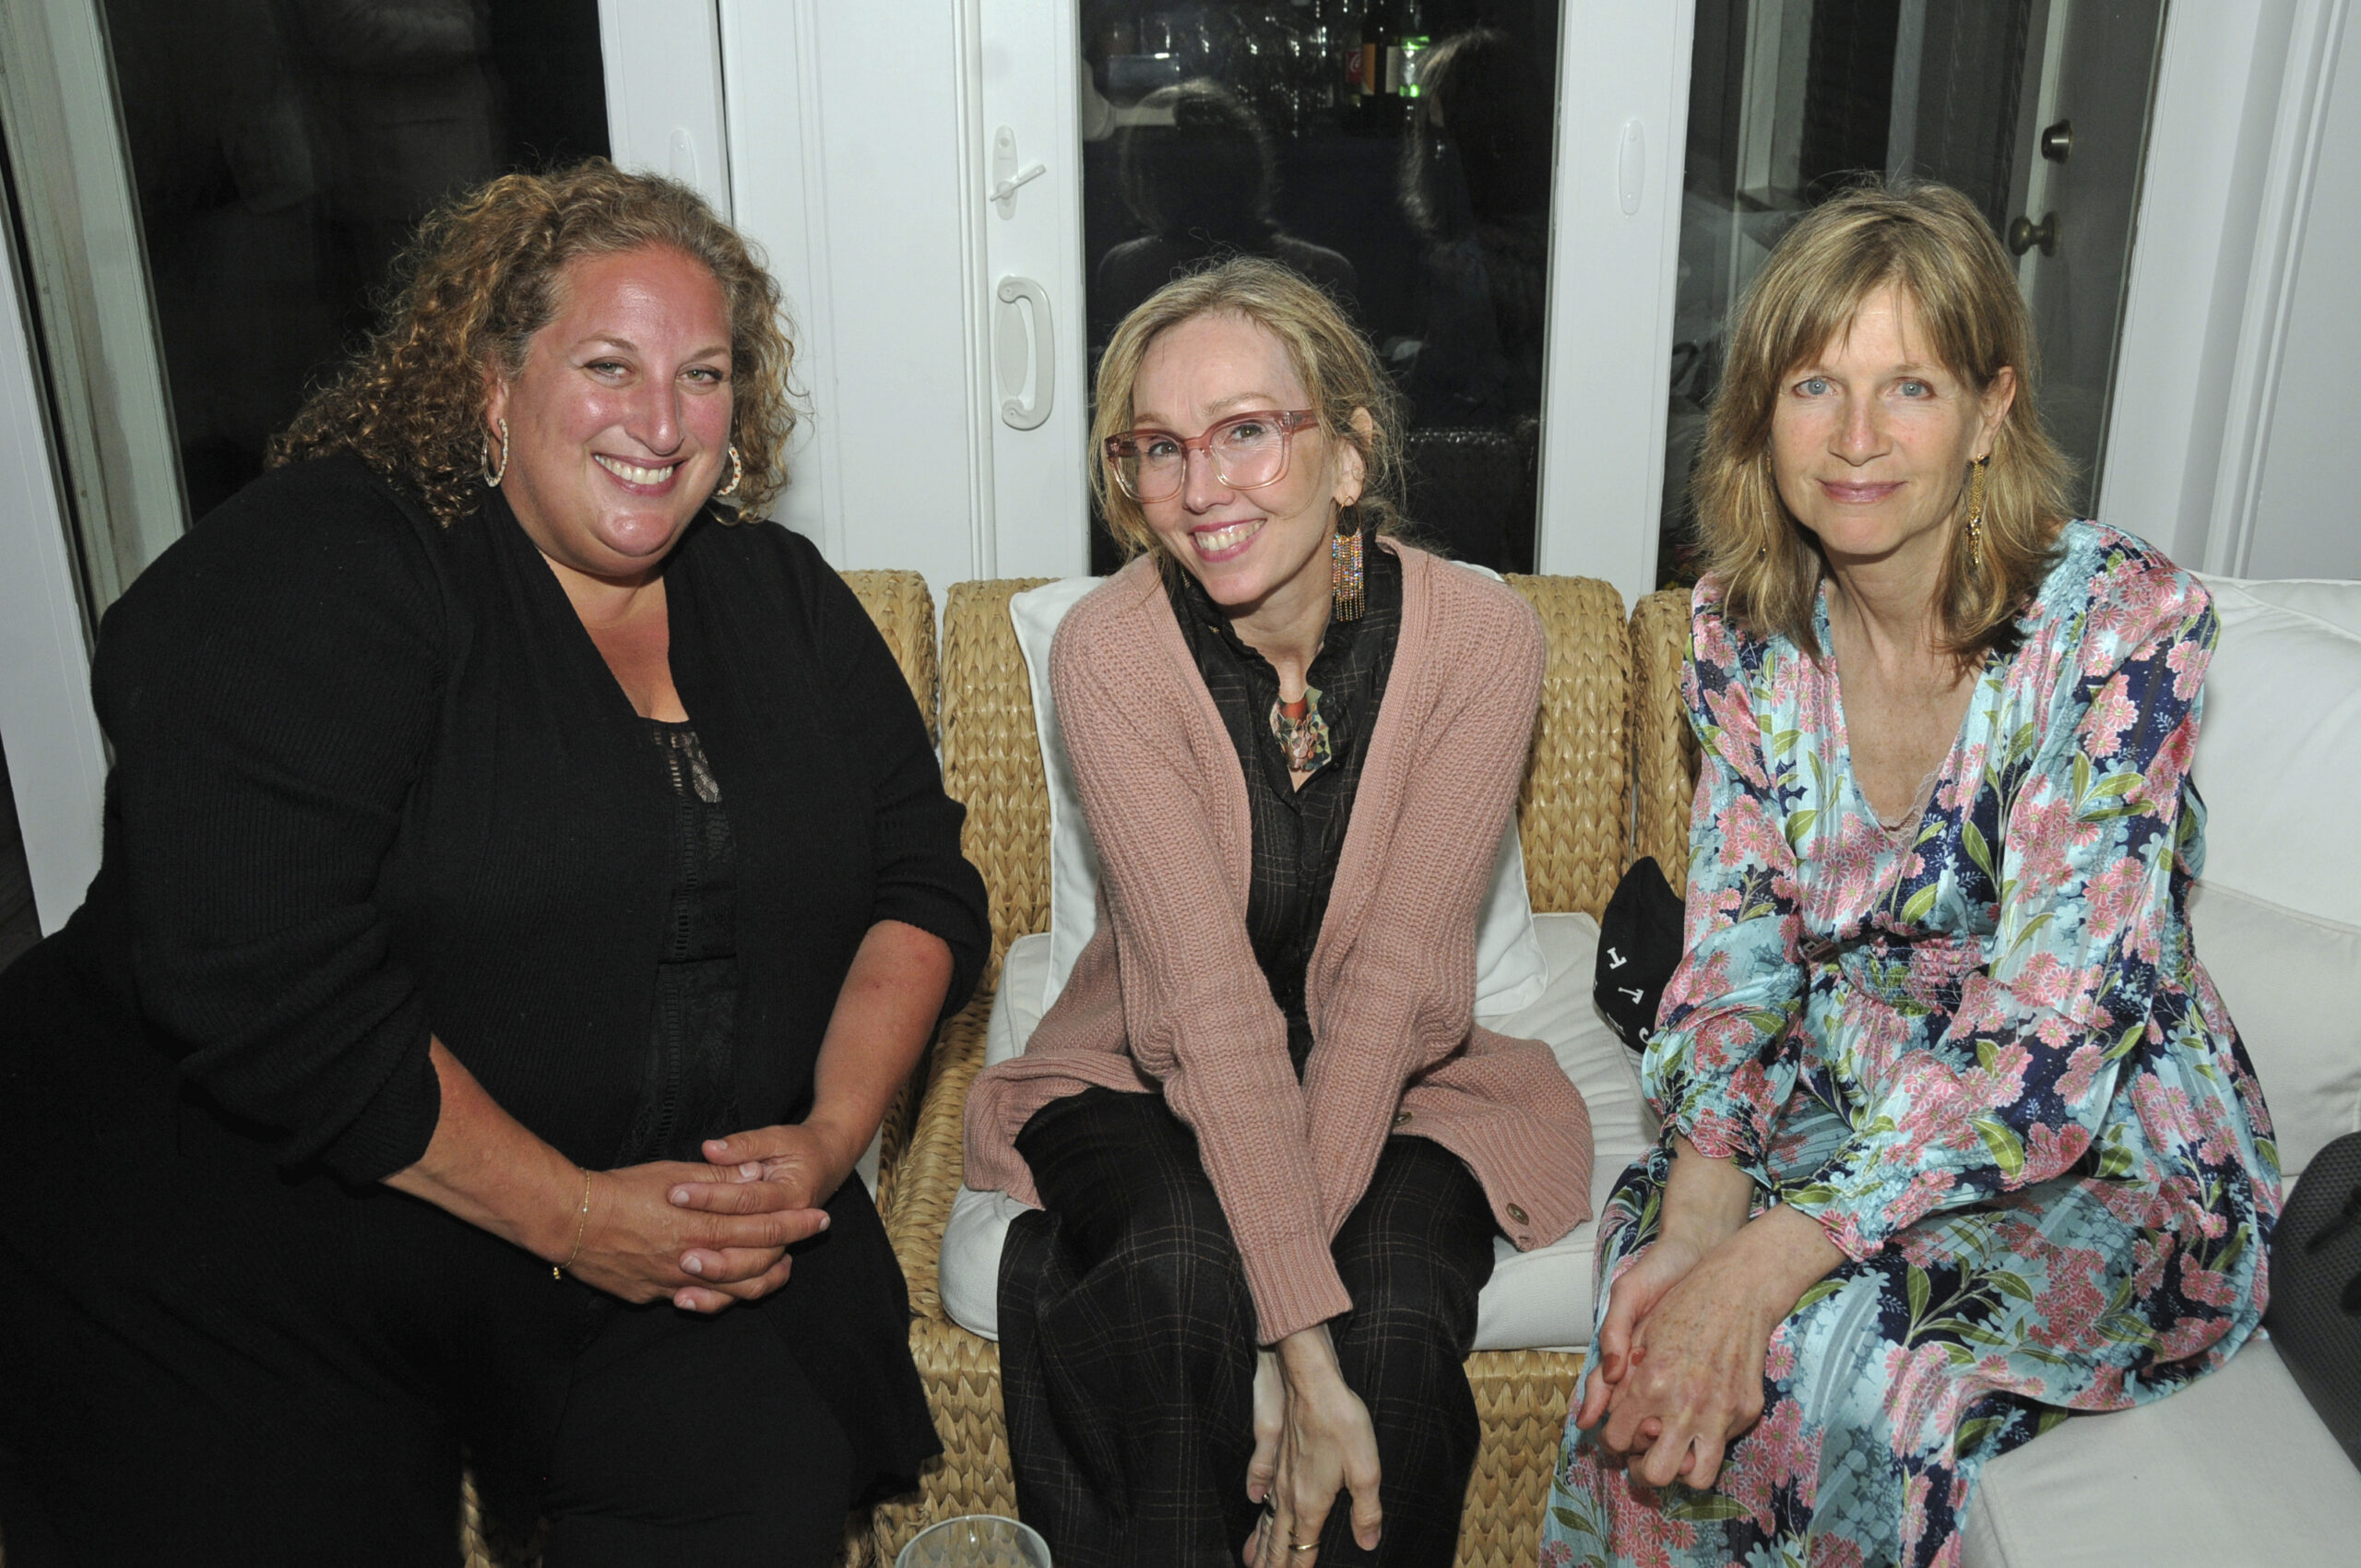 Amy Kirwin, Andrea Grover, and Corinne Erni at the benefit on Saturday.  RICHARD LEWIN